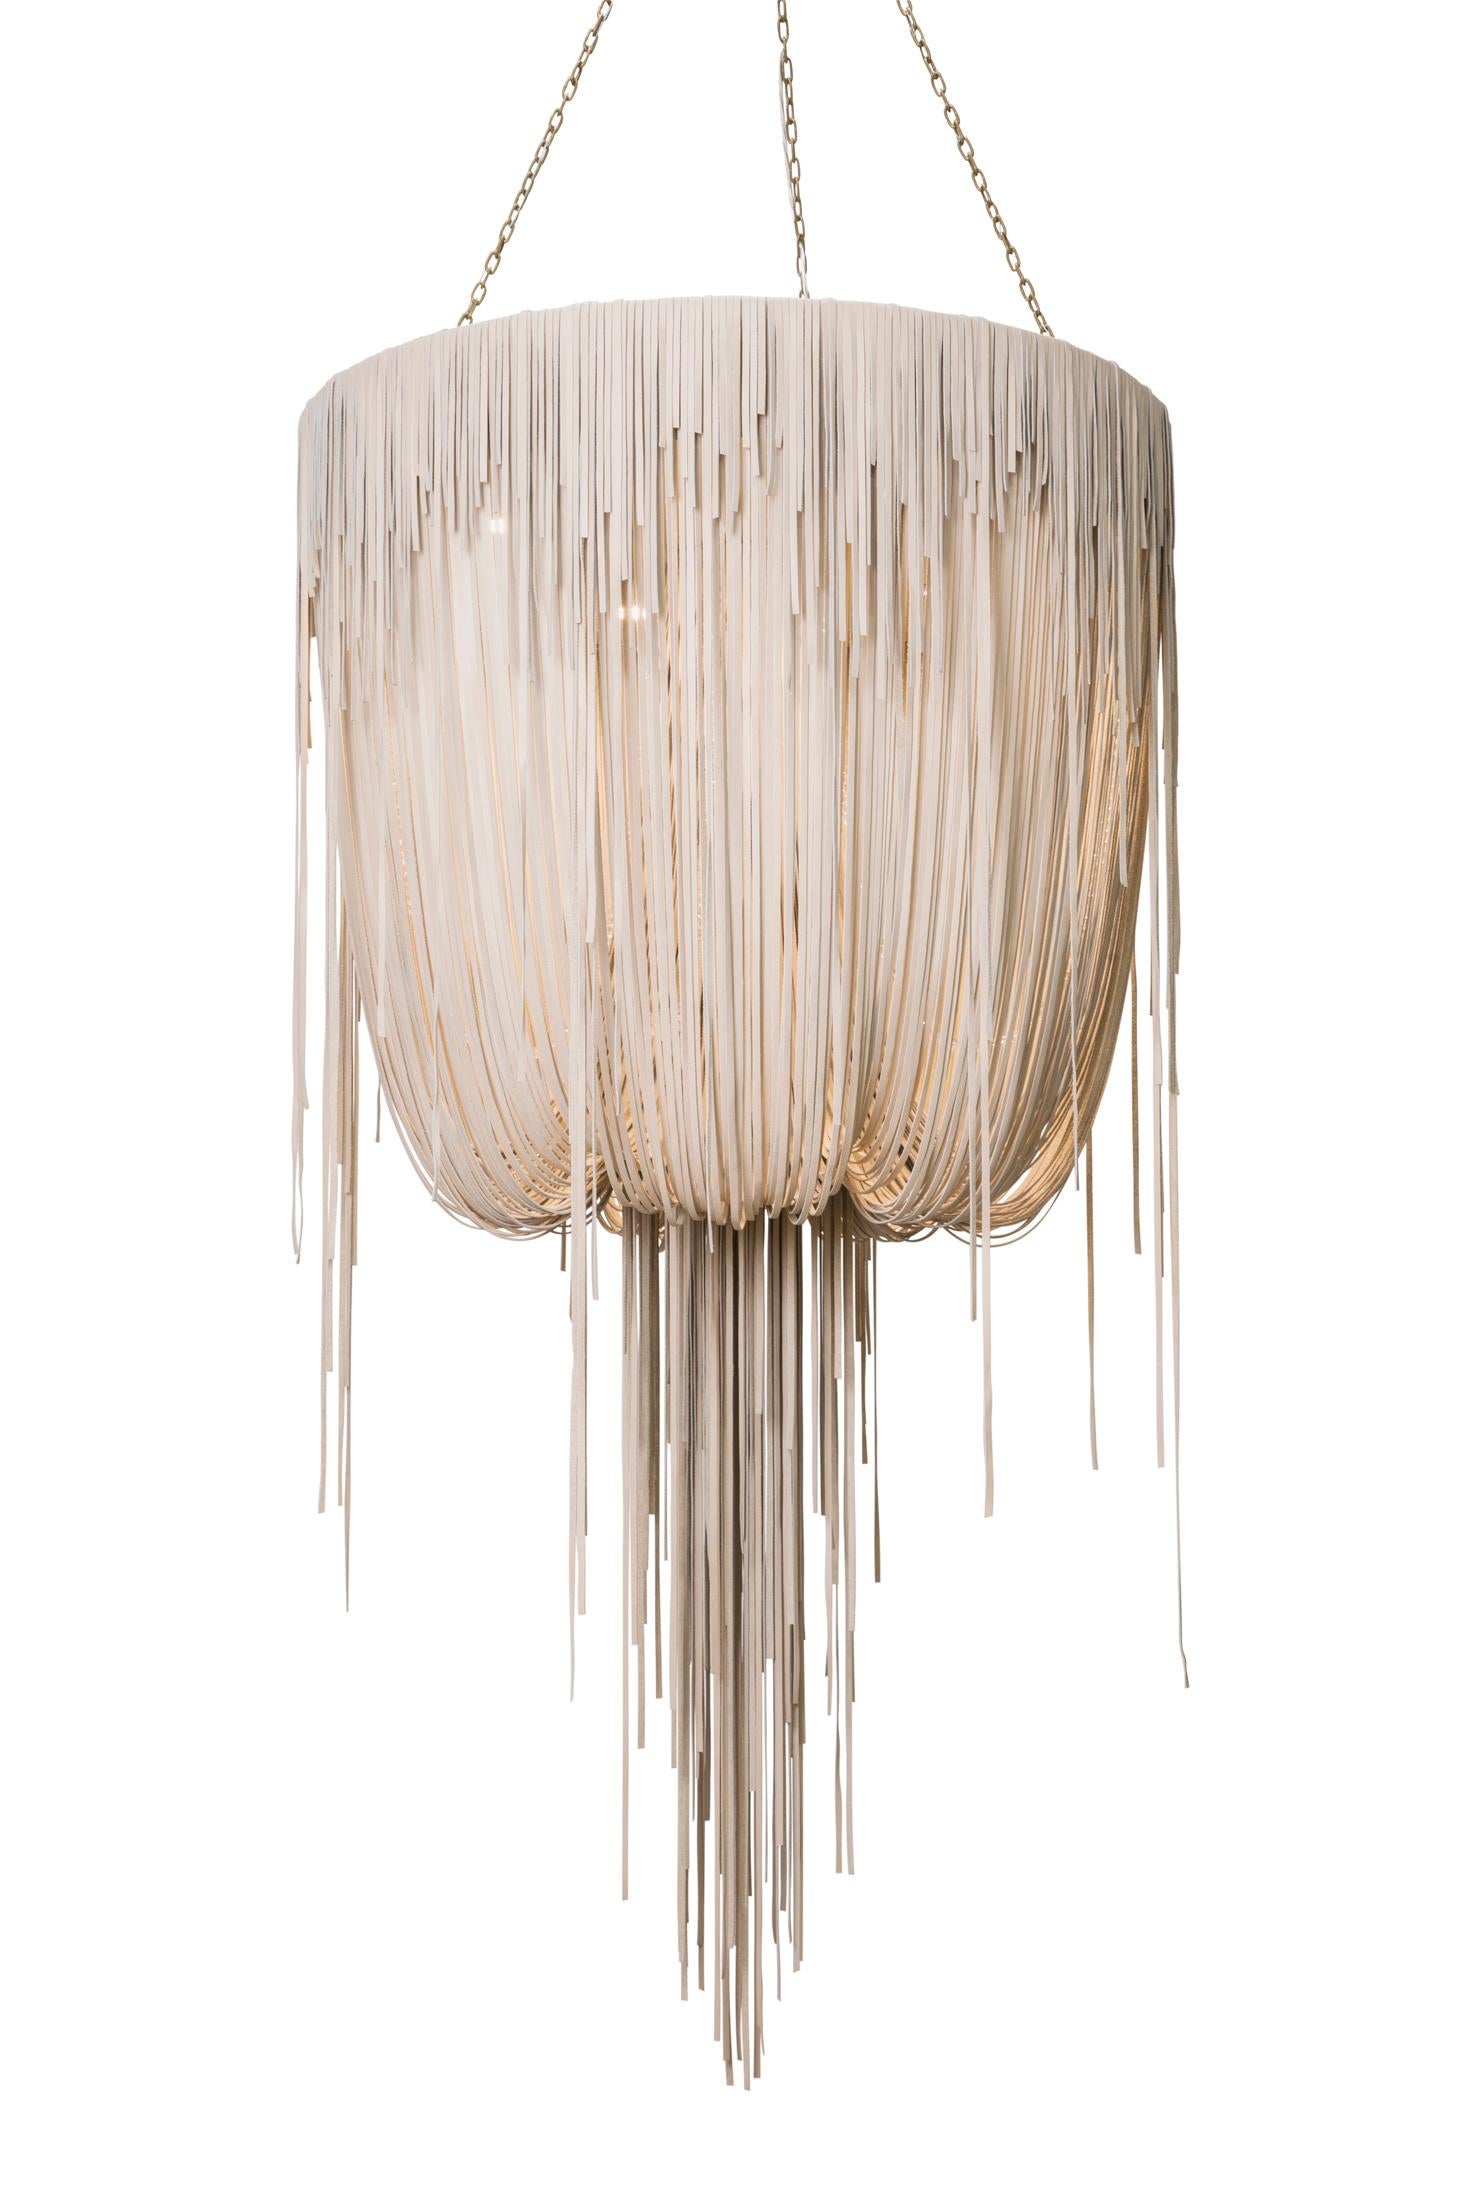 Urchin Leather Chandelier, Medium in Cream-Stone Leather For Sale 5